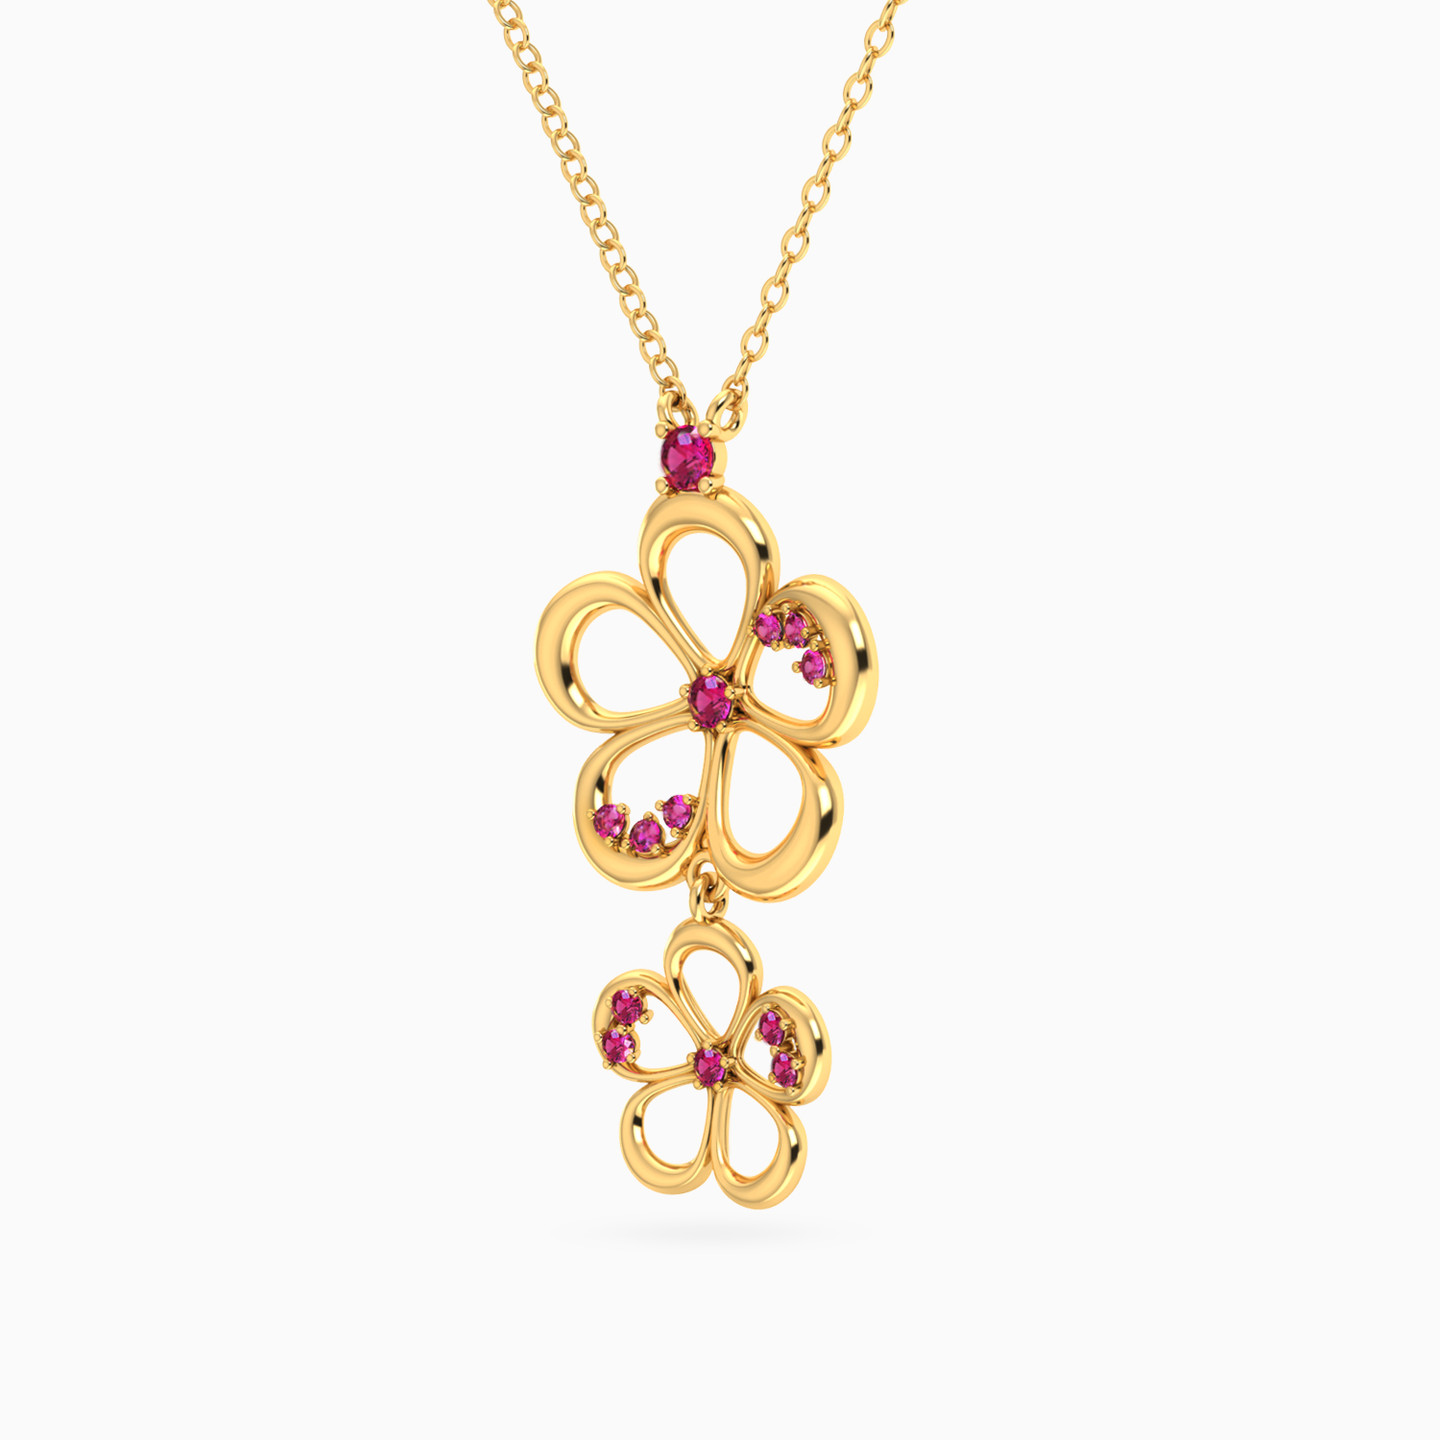 Flower Shaped Colored Stones Pendant with 18K Gold Chain - 2